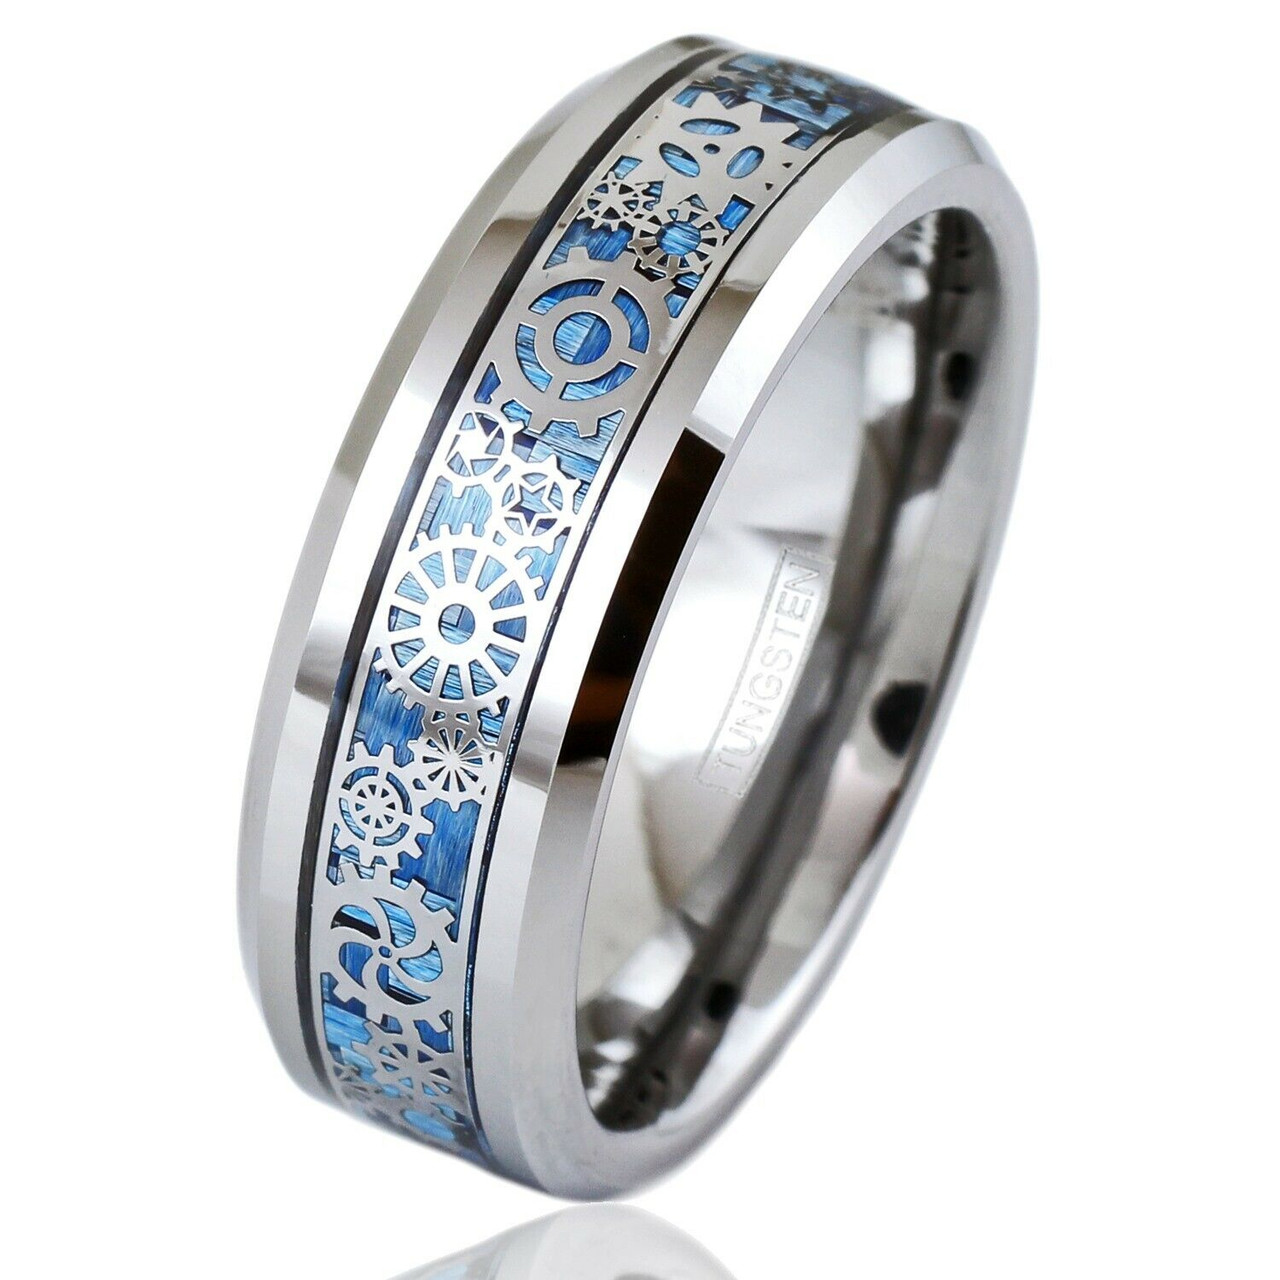 (8mm) Unisex or Men's Tungsten Carbide Wedding ring band. Wedding ring band Sky Blue Carbon Fiber Inlay Silver Band with Silver Mechanical Gears. Tungsten Carbide Ring